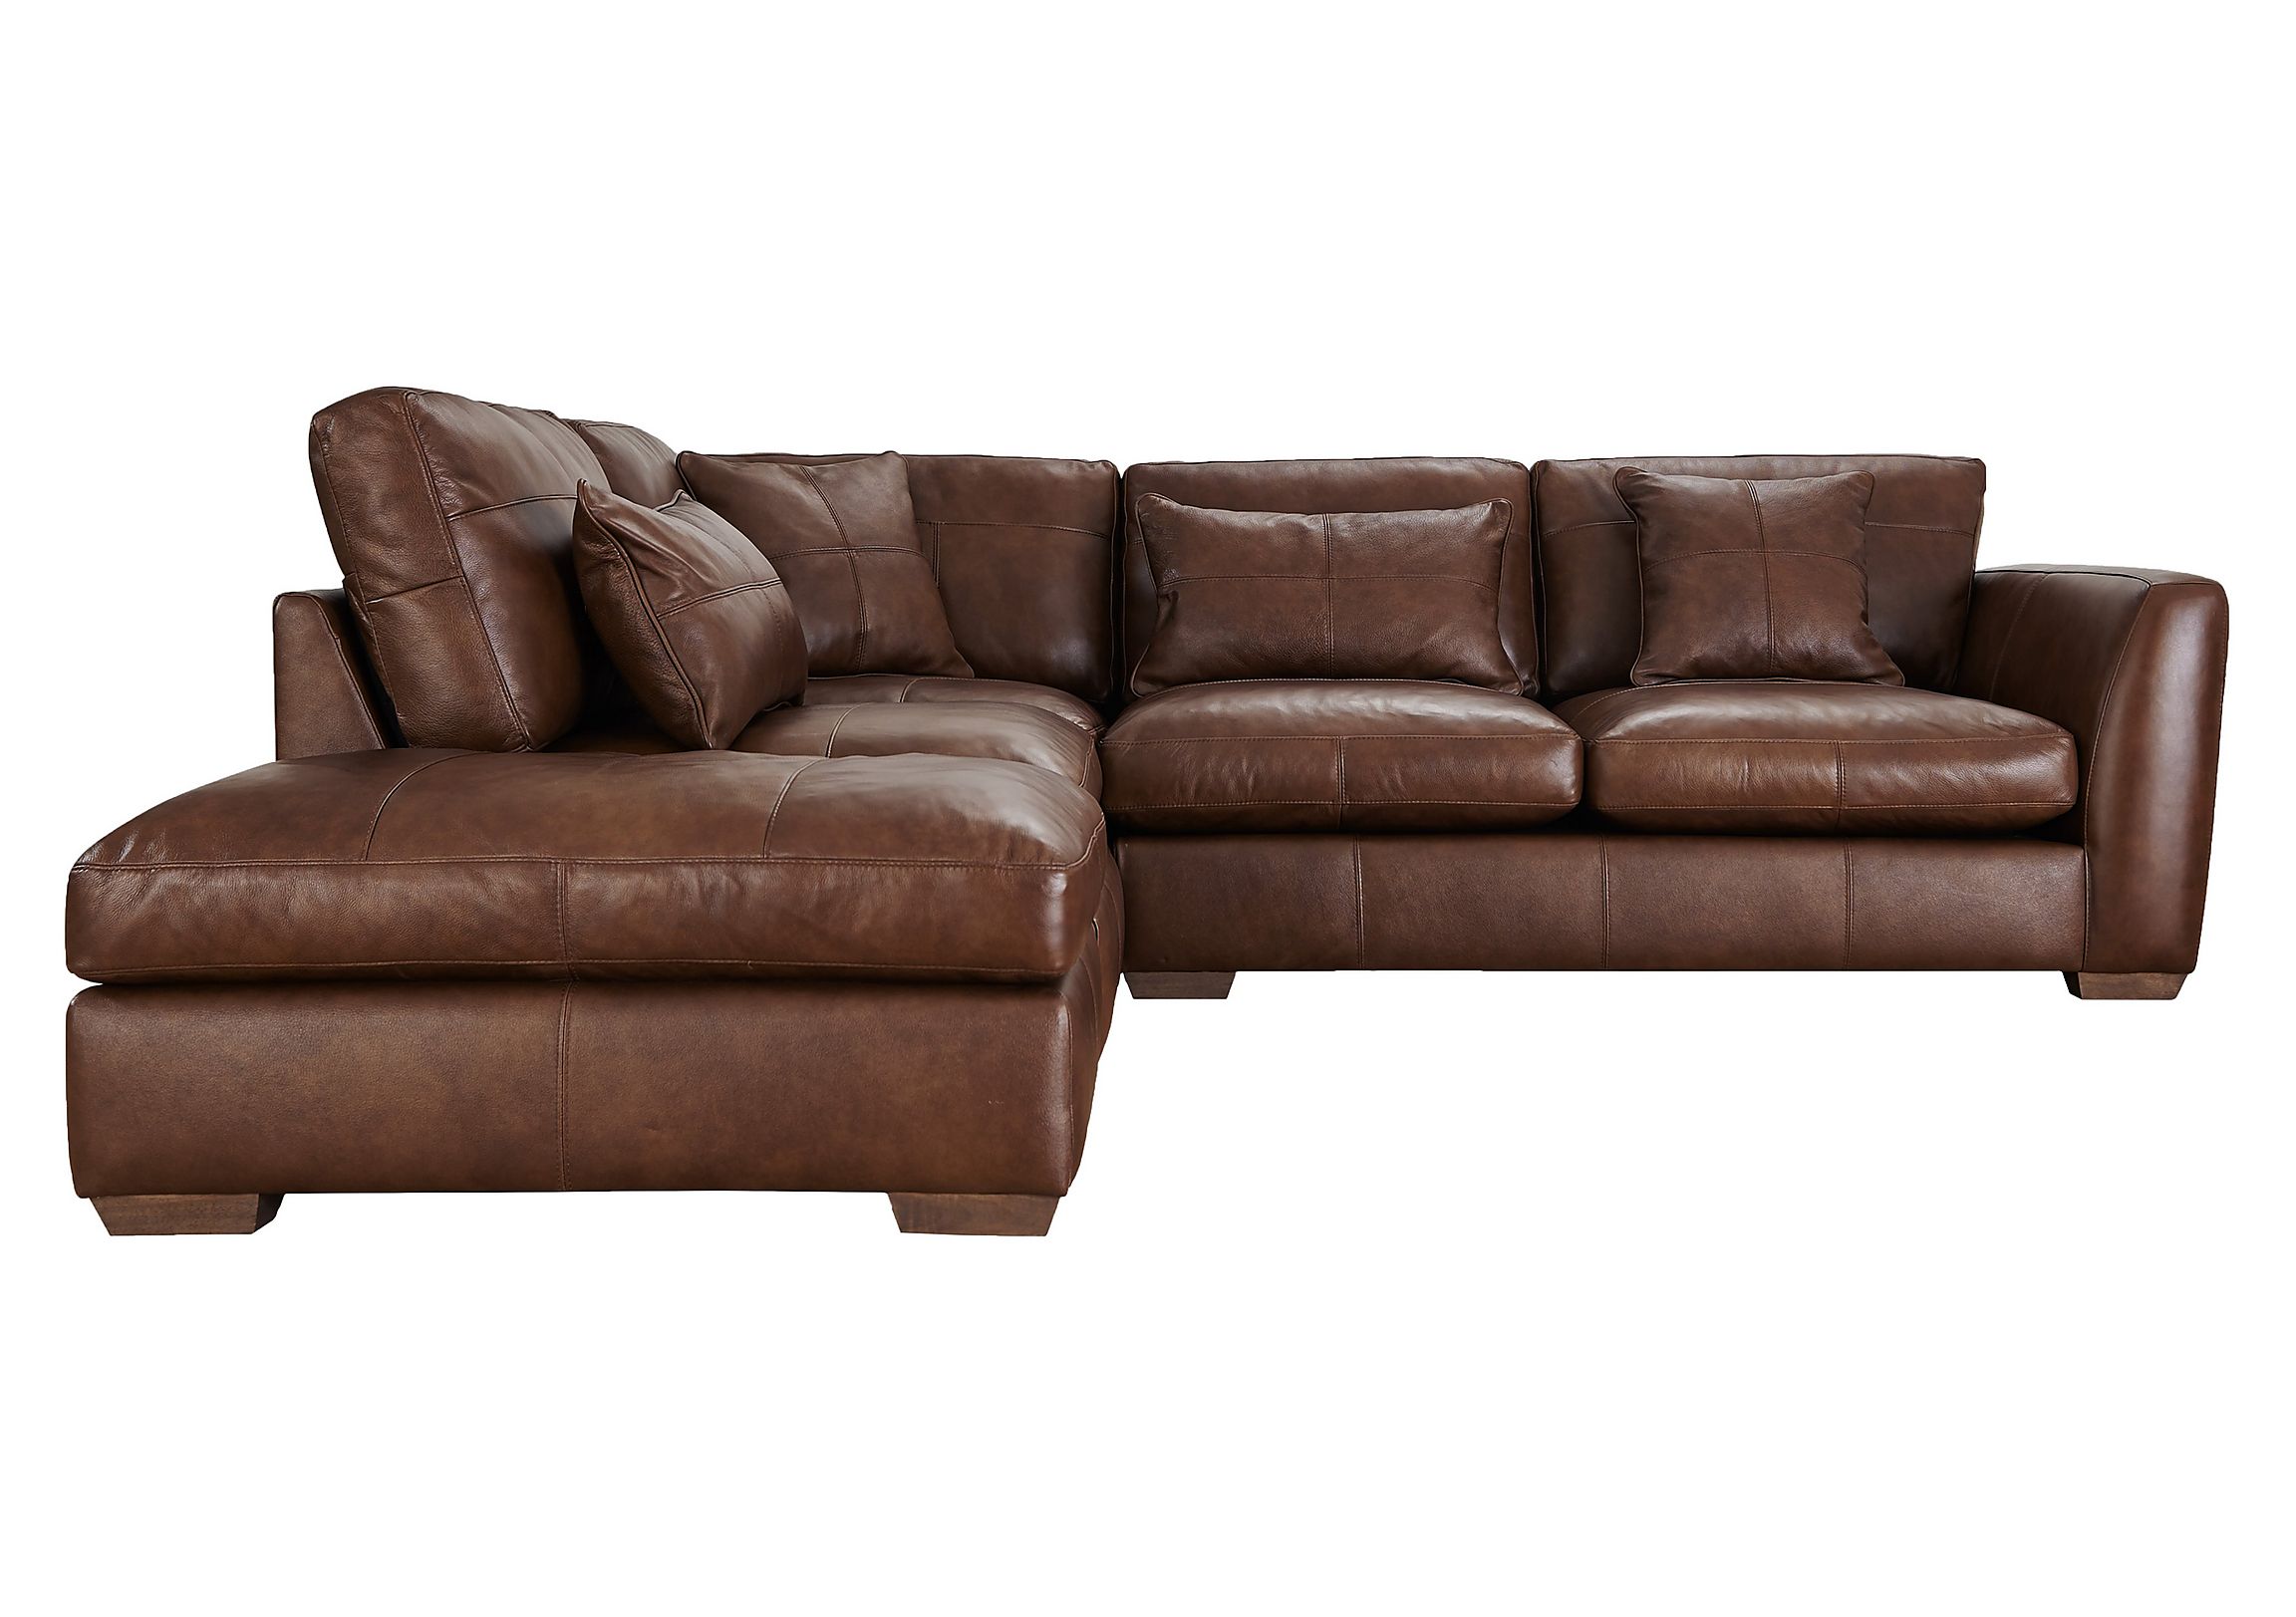 Small Brown Leather Corner Sofa Images